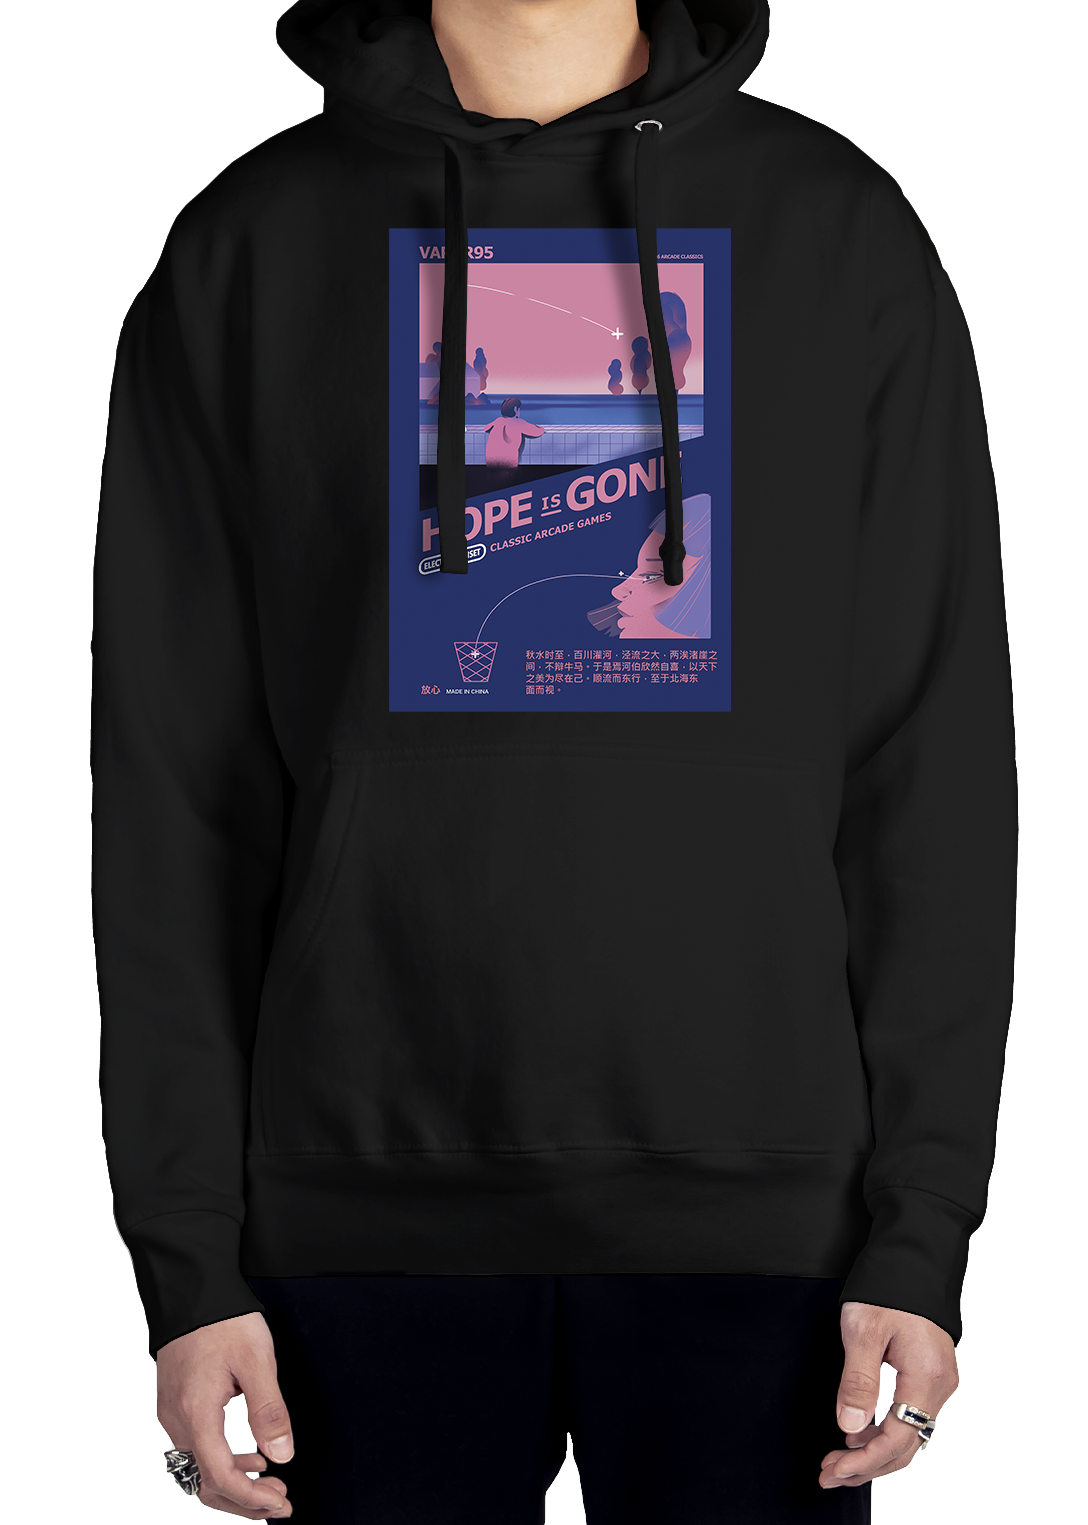 Experience the Vaporwave fashion with Vapor95's Graphic Hoodies | Hope ...